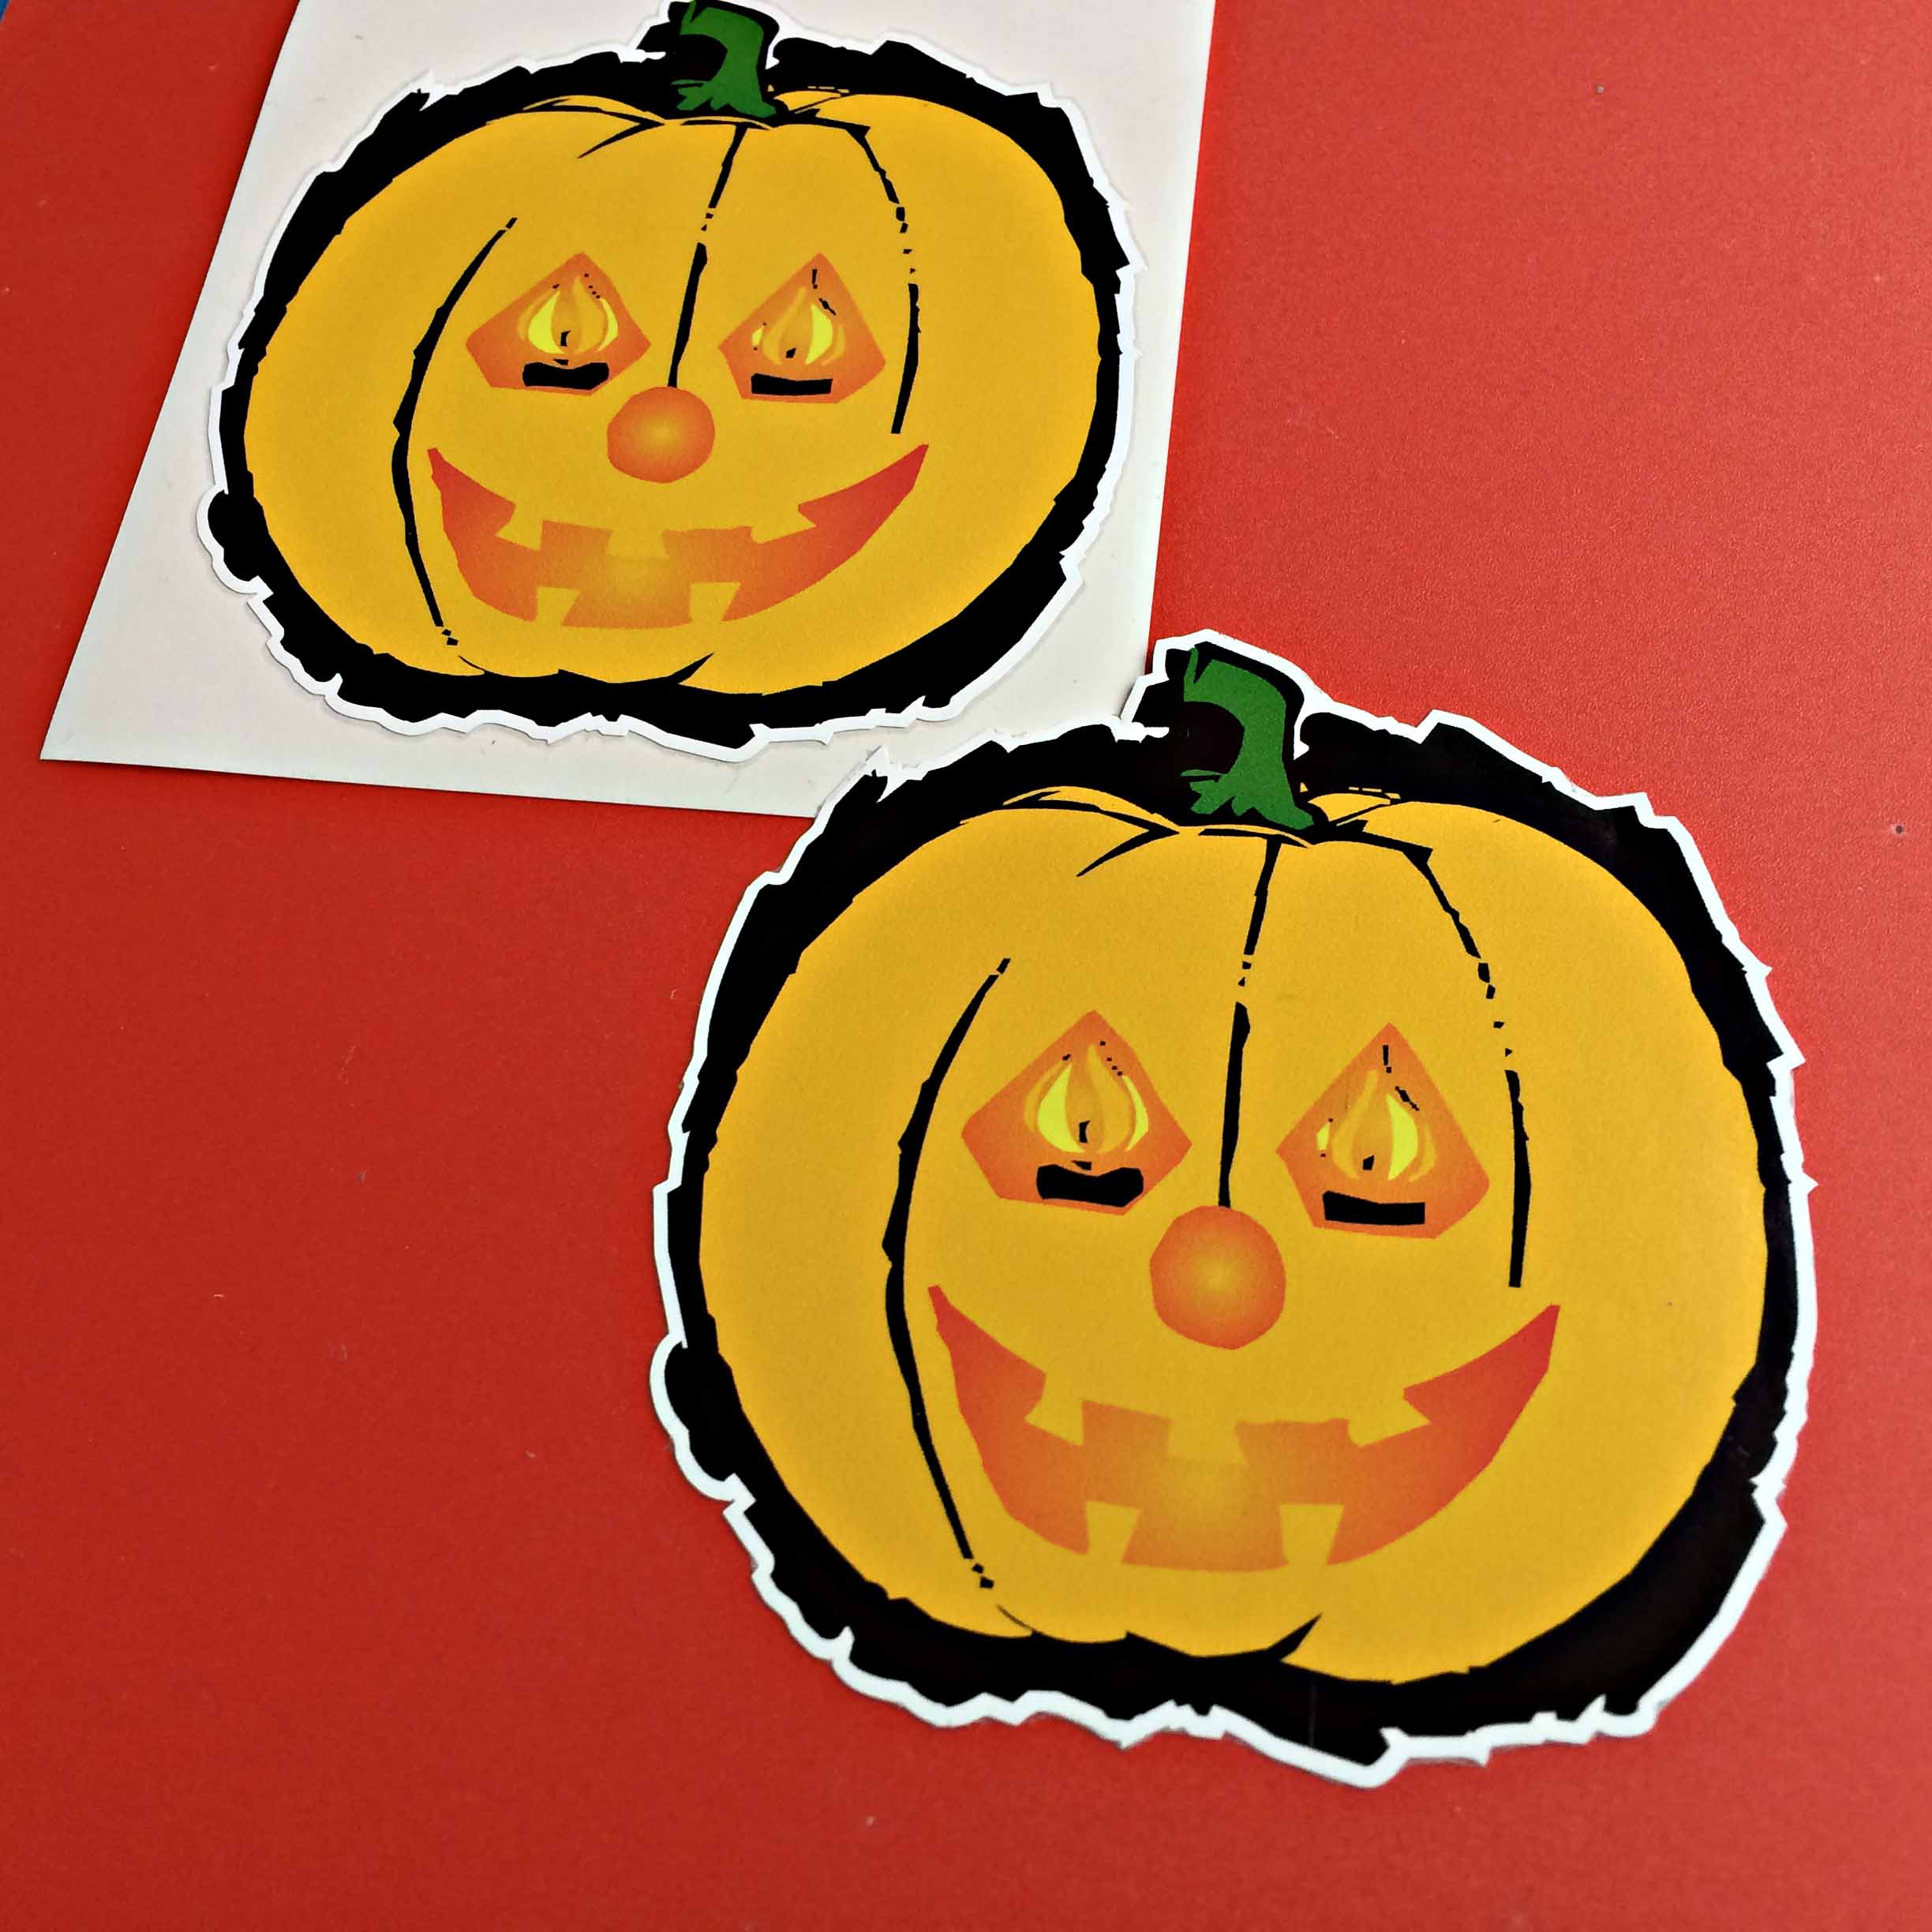 HALLOWEEN PUMPKIN STICKERS. An orange pumpkin with a green stalk on a black background. It has a mouth, nose and eyes displaying flames.